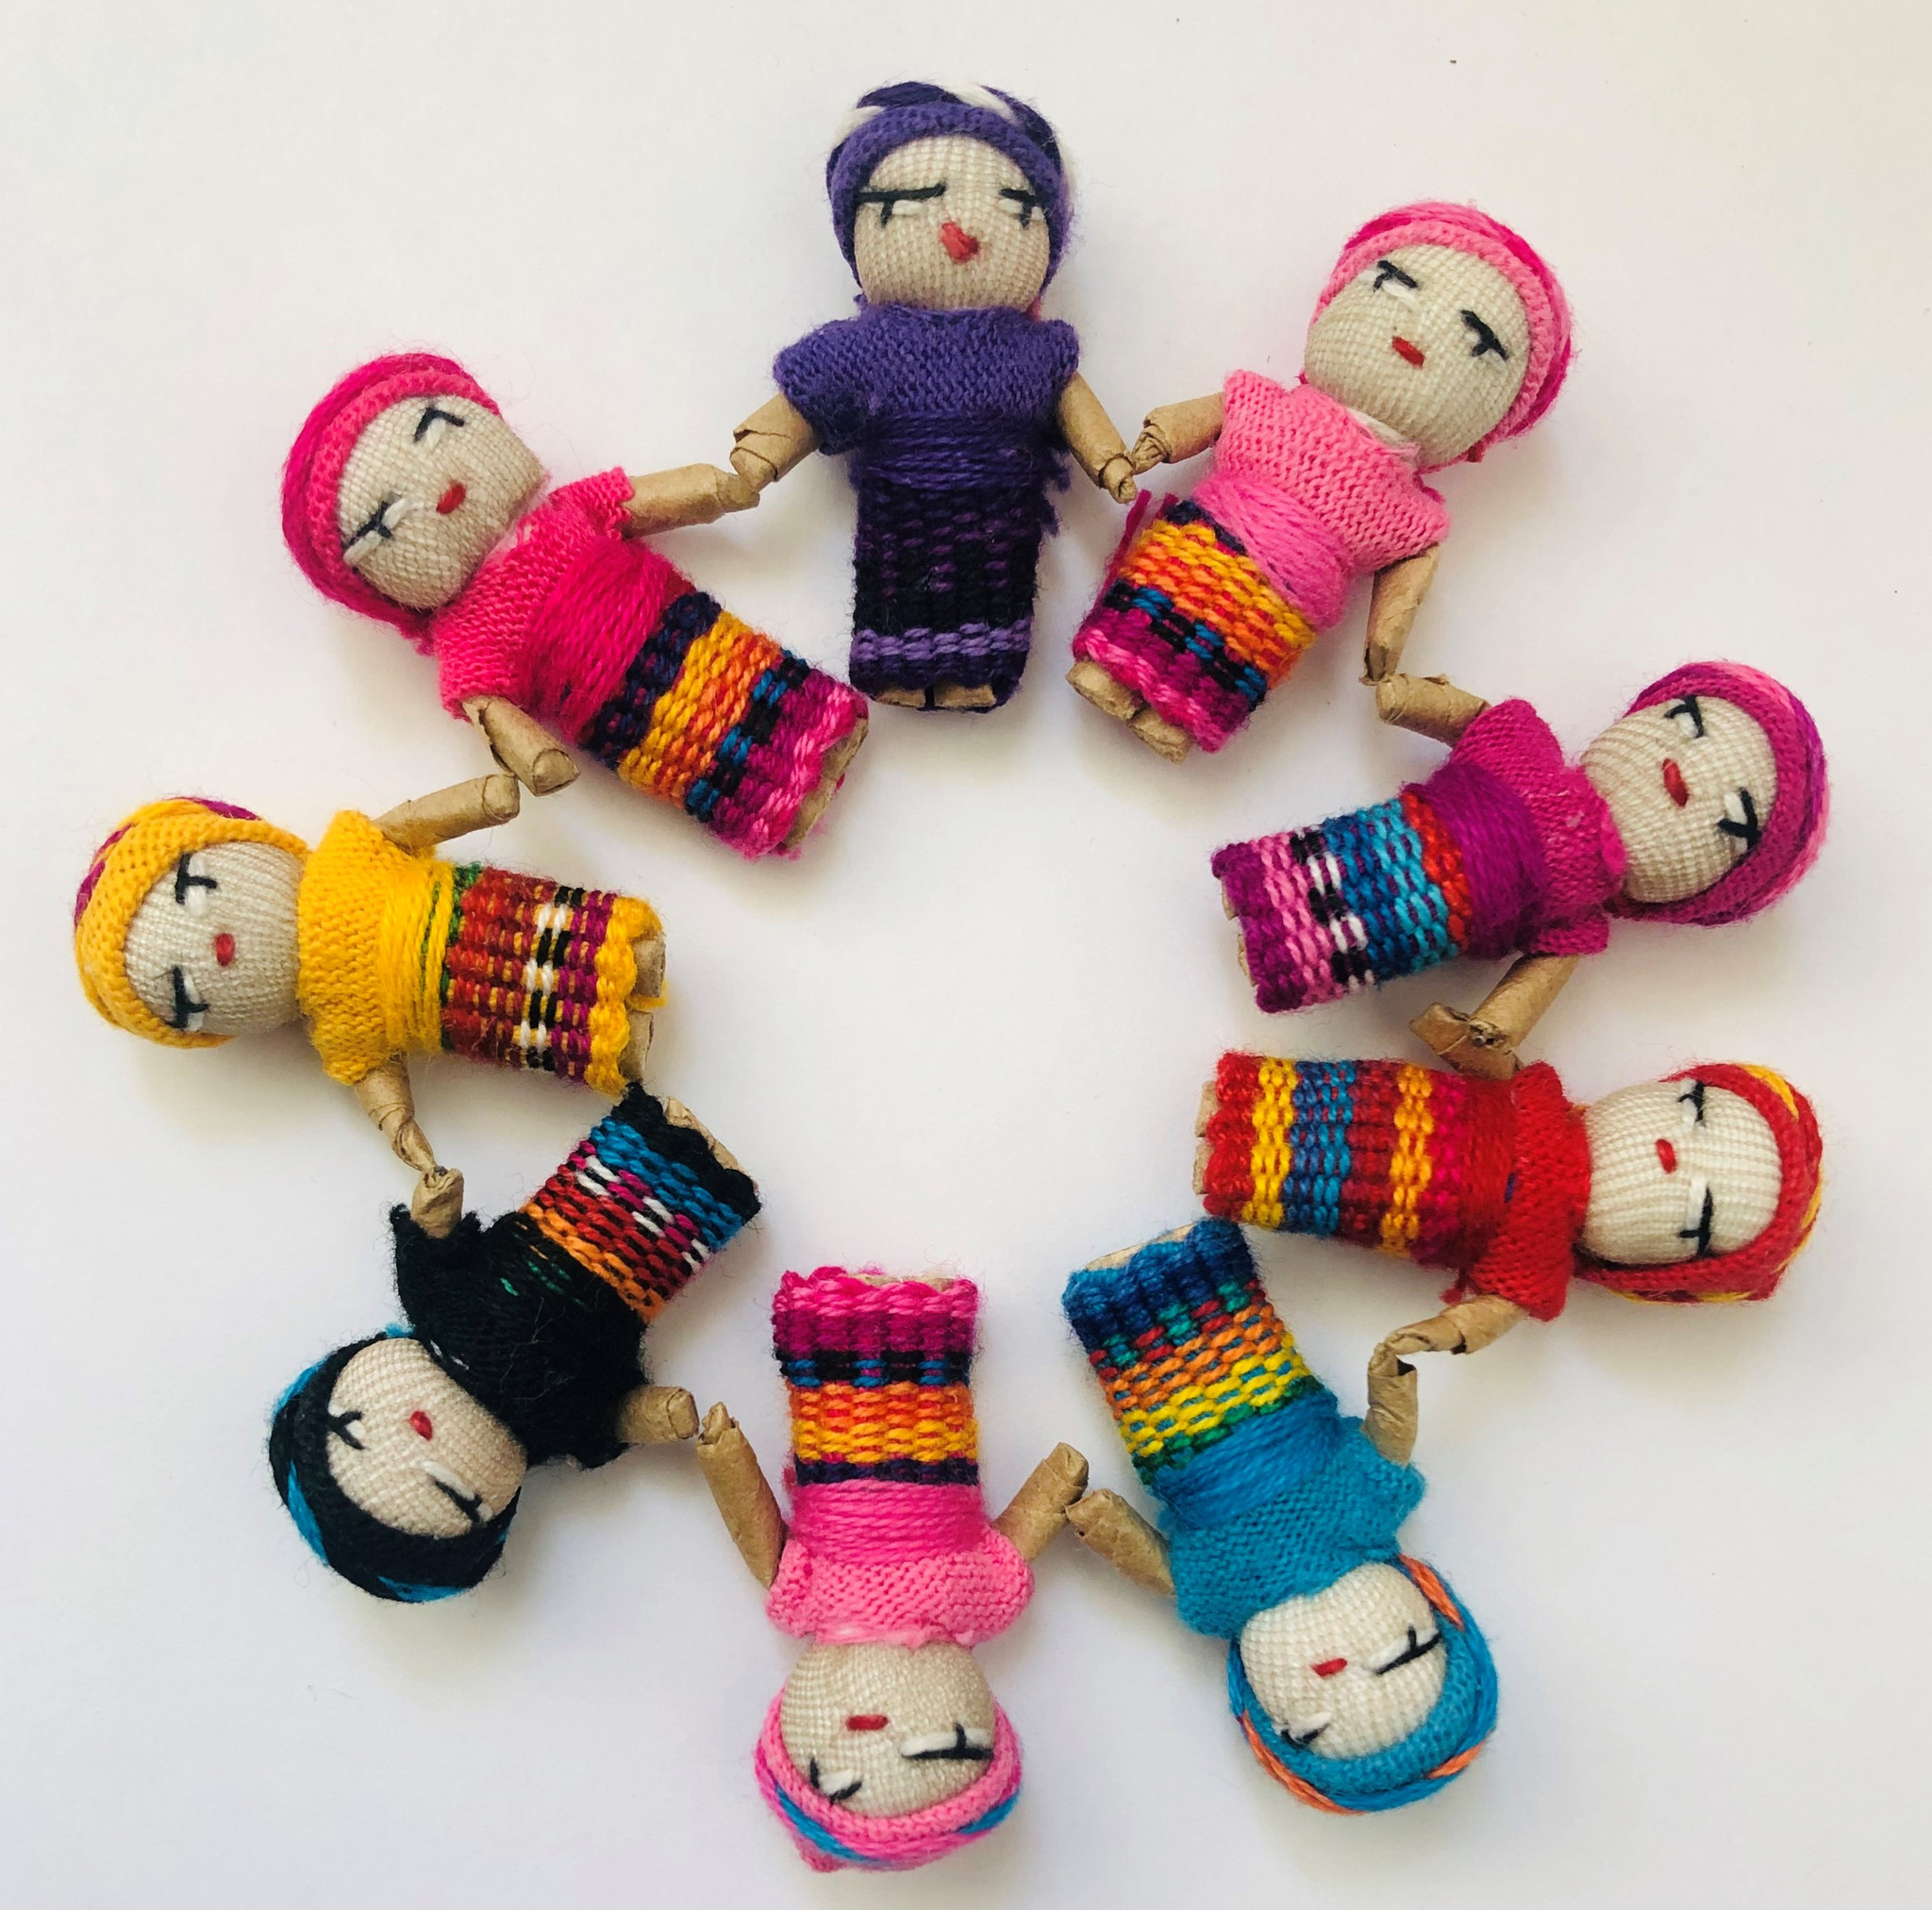 Worry dolls are small, mostly hand-made dolls that originate from Guatemala  and Mexico